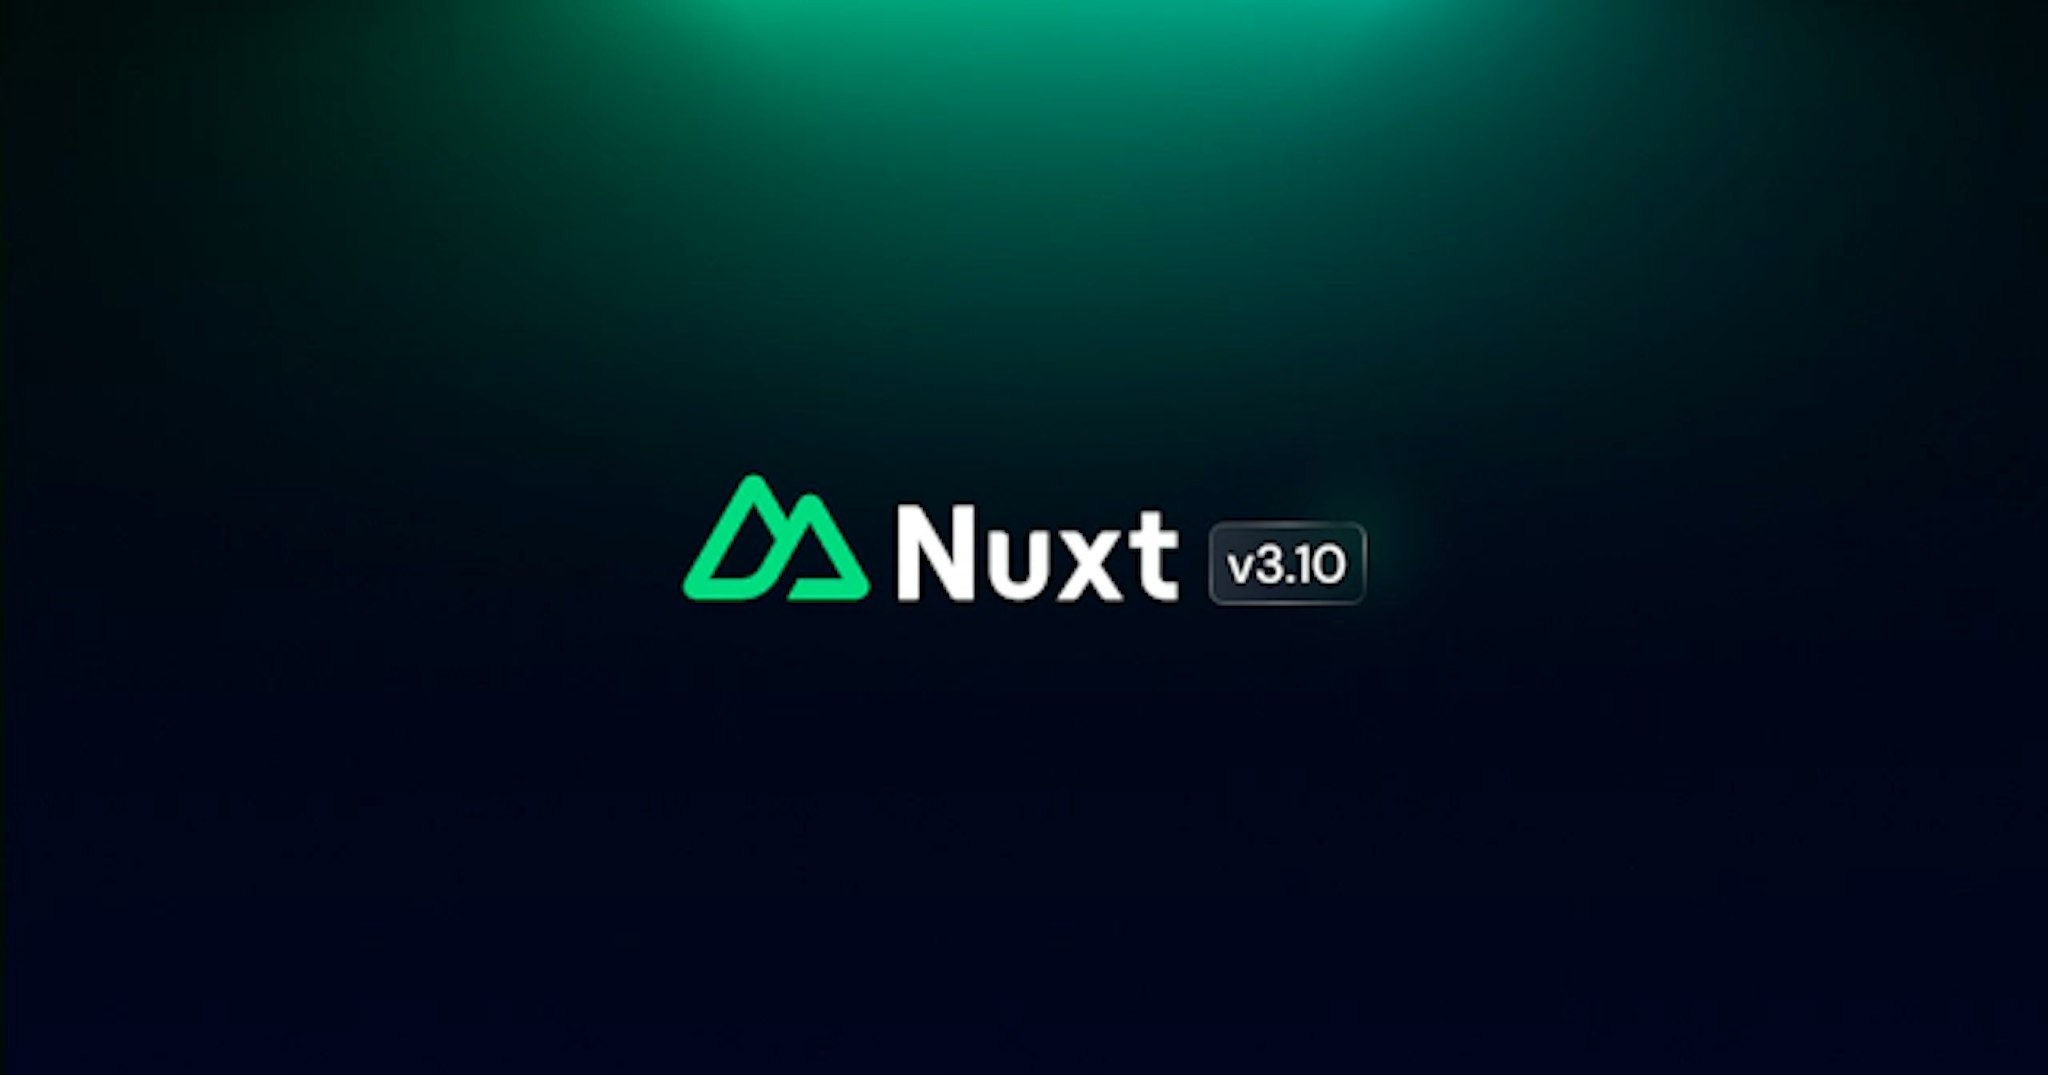 nuxt logo of version 3.10 on a black background with a green spotlight gradient in the middle